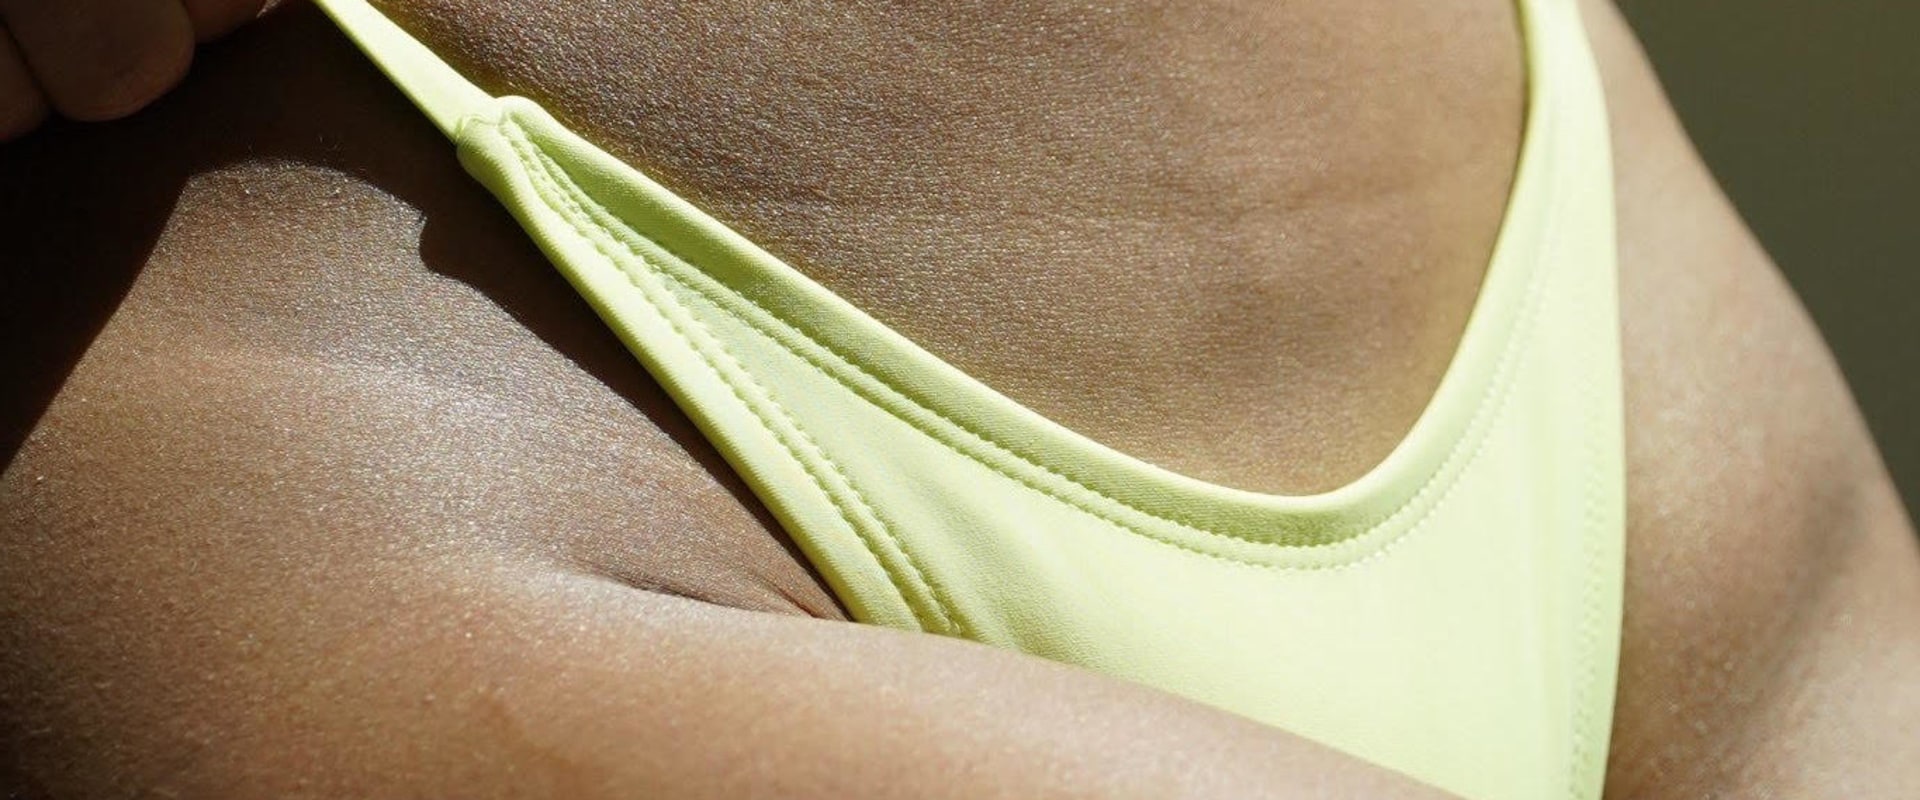 Is Laser Hair Removal Safe for Your Pubic Area? - An Expert's Perspective